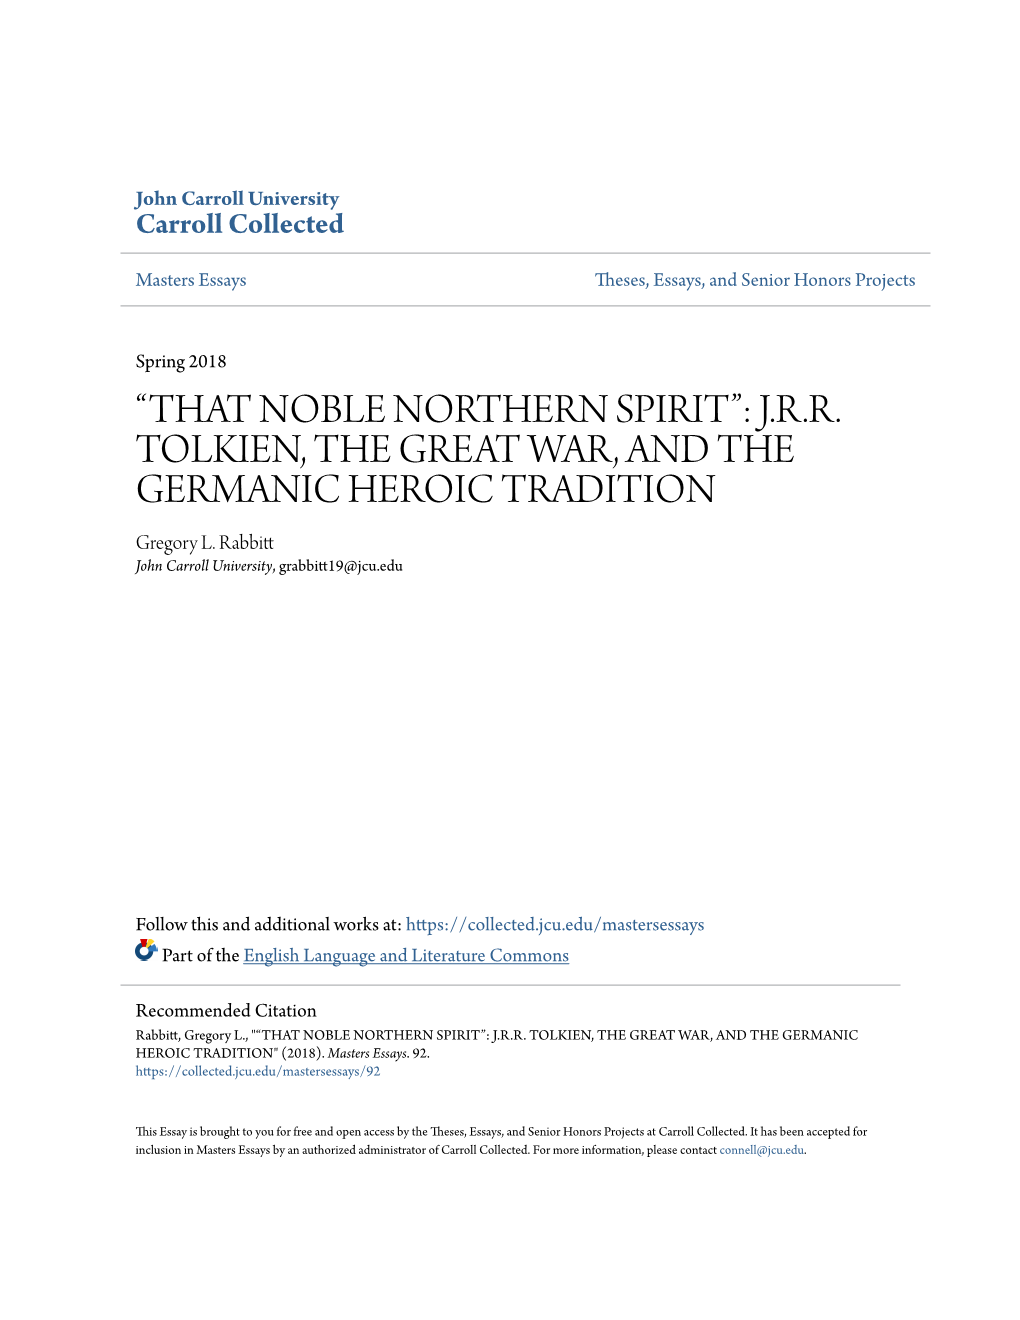 J.R.R. TOLKIEN, the GREAT WAR, and the GERMANIC HEROIC TRADITION Gregory L